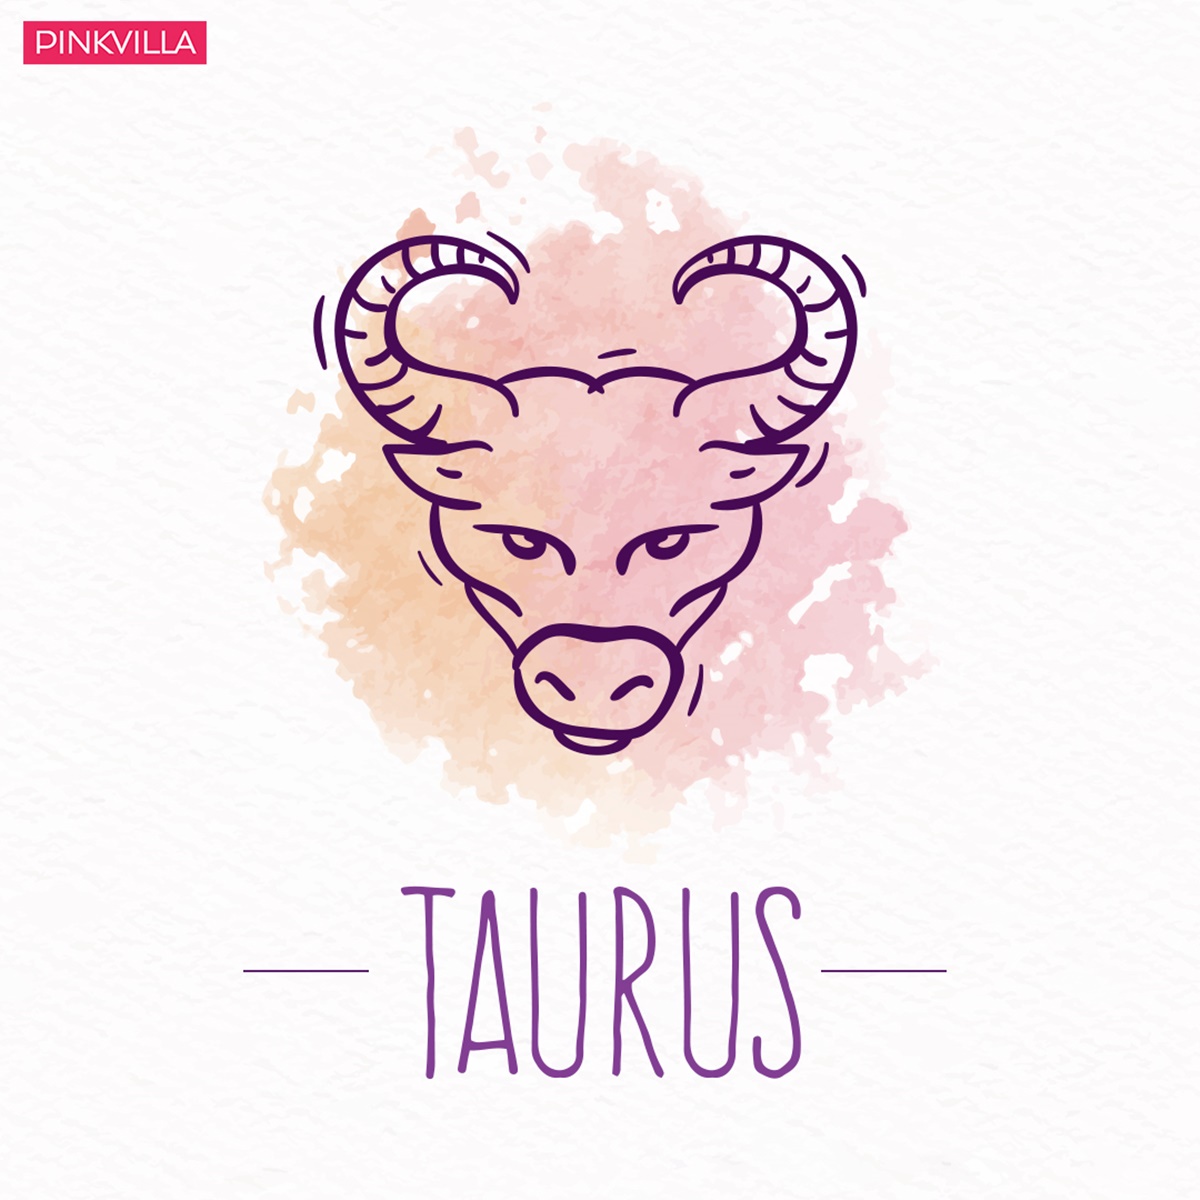 These Zodiac signs are sorely missed by ex-boyfriends who regret losing them